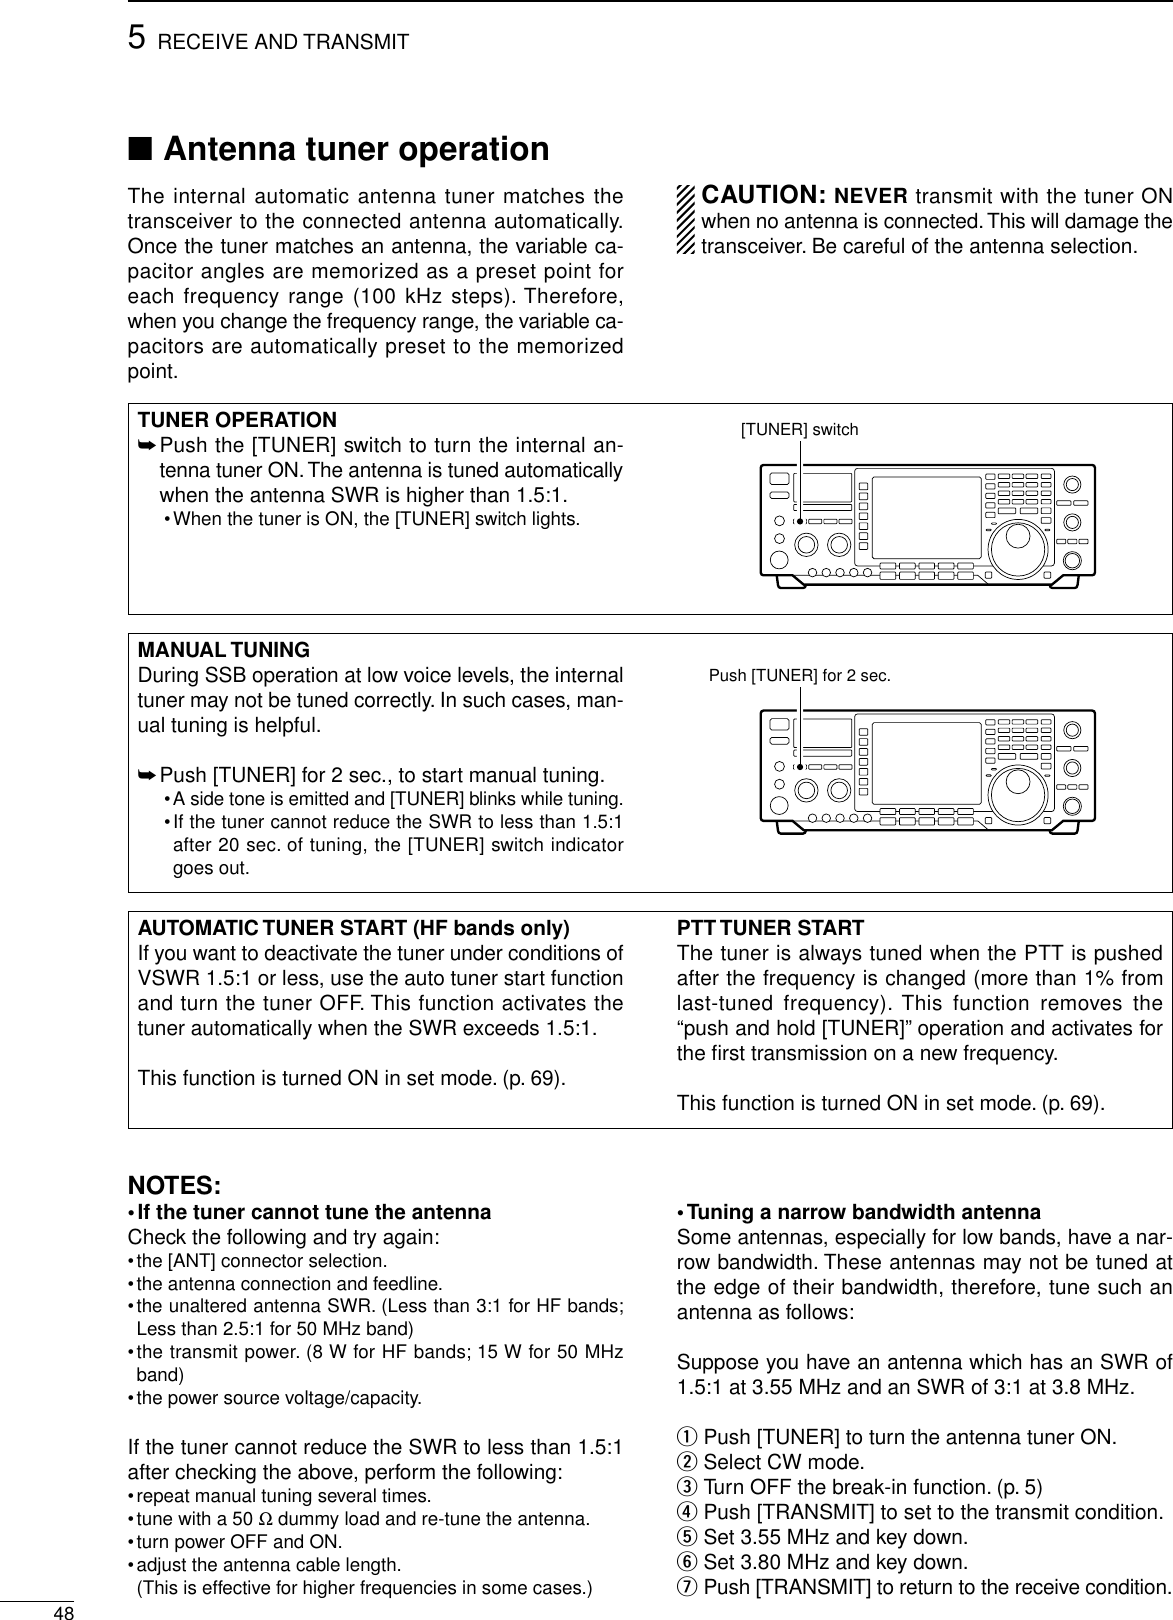 ■Antenna tuner operationThe internal automatic antenna tuner matches thetransceiver to the connected antenna automatically.Once the tuner matches an antenna, the variable ca-pacitor angles are memorized as a preset point foreach frequency range (100 kHz steps). Therefore,when you change the frequency range, the variable ca-pacitors are automatically preset to the memorizedpoint.CAUTION: NEVER transmit with the tuner ONwhen no antenna is connected.This will damage thetransceiver. Be careful of the antenna selection.485RECEIVE AND TRANSMITTUNER OPERATION➥Push the [TUNER] switch to turn the internal an-tenna tuner ON. The antenna is tuned automaticallywhen the antenna SWR is higher than 1.5:1.•When the tuner is ON, the [TUNER] switch lights.[TUNER] switchMANUAL TUNINGDuring SSB operation at low voice levels, the internaltuner may not be tuned correctly. In such cases, man-ual tuning is helpful.➥Push [TUNER] for 2 sec., to start manual tuning.•A side tone is emitted and [TUNER] blinks while tuning.•If the tuner cannot reduce the SWR to less than 1.5:1after 20 sec. of tuning, the [TUNER] switch indicatorgoes out.Push [TUNER] for 2 sec.AUTOMATIC TUNER START (HF bands only)If you want to deactivate the tuner under conditions ofVSWR 1.5:1 or less, use the auto tuner start functionand turn the tuner OFF. This function activates thetuner automatically when the SWR exceeds 1.5:1.This function is turned ON in set mode. (p. 69).PTT TUNER STARTThe tuner is always tuned when the PTT is pushedafter the frequency is changed (more than 1% fromlast-tuned frequency). This function removes the“push and hold [TUNER]”operation and activates forthe ﬁrst transmission on a new frequency.This function is turned ON in set mode. (p. 69).NOTES:•If the tuner cannot tune the antennaCheck the following and try again:•the [ANT] connector selection.•the antenna connection and feedline.•the unaltered antenna SWR. (Less than 3:1 for HF bands;Less than 2.5:1 for 50 MHz band)•the transmit power. (8 W for HF bands; 15 W for 50 MHzband)•the power source voltage/capacity.If the tuner cannot reduce the SWR to less than 1.5:1after checking the above, perform the following:•repeat manual tuning several times.•tune with a 50 Ωdummy load and re-tune the antenna.•turn power OFF and ON.•adjust the antenna cable length.(This is effective for higher frequencies in some cases.)•Tuning a narrow bandwidth antennaSome antennas, especially for low bands, have a nar-row bandwidth. These antennas may not be tuned atthe edge of their bandwidth, therefore, tune such anantenna as follows:Suppose you have an antenna which has an SWR of1.5:1 at 3.55 MHz and an SWR of 3:1 at 3.8 MHz.qPush [TUNER] to turn the antenna tuner ON.wSelect CW mode.eTurn OFF the break-in function. (p. 5)rPush [TRANSMIT] to set to the transmit condition.tSet 3.55 MHz and key down.ySet 3.80 MHz and key down.uPush [TRANSMIT] to return to the receive condition.